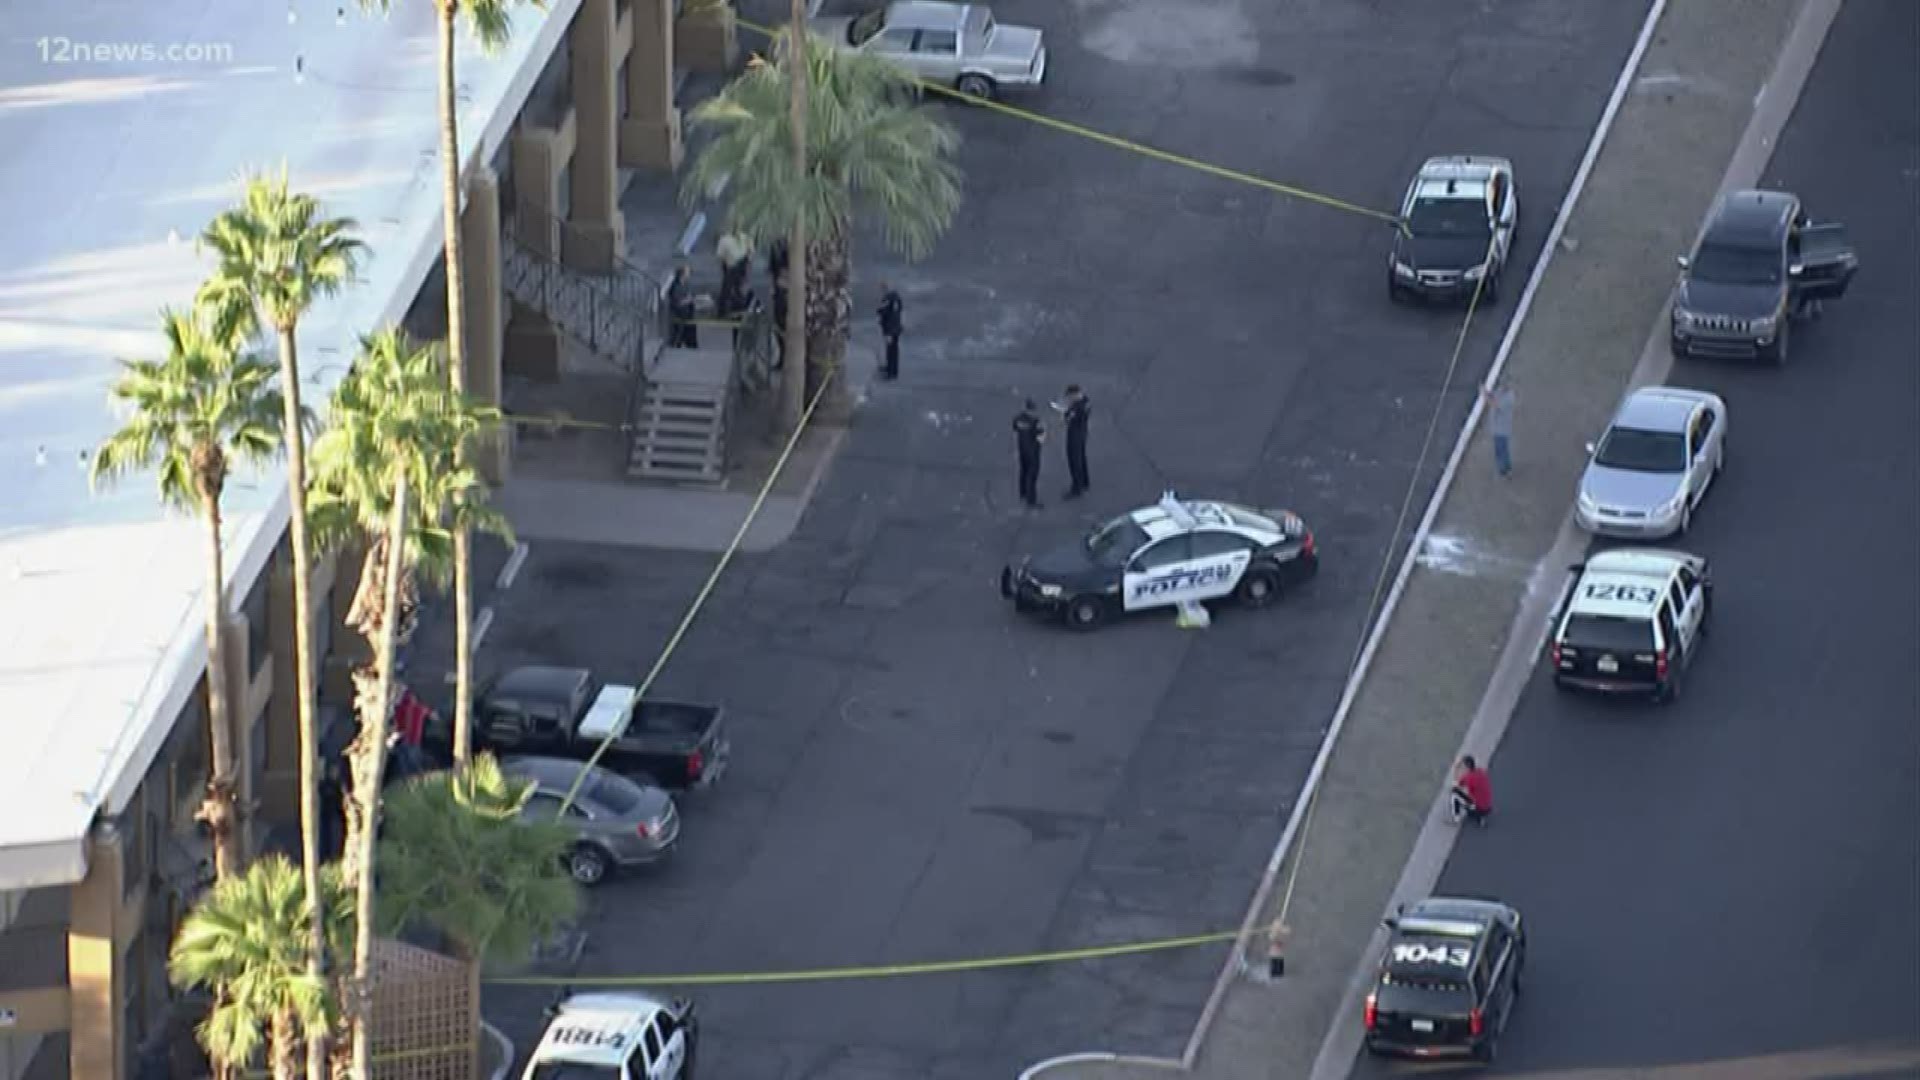 Two people were reportedly shot at a hotel in Mesa near Main Street and Higley.